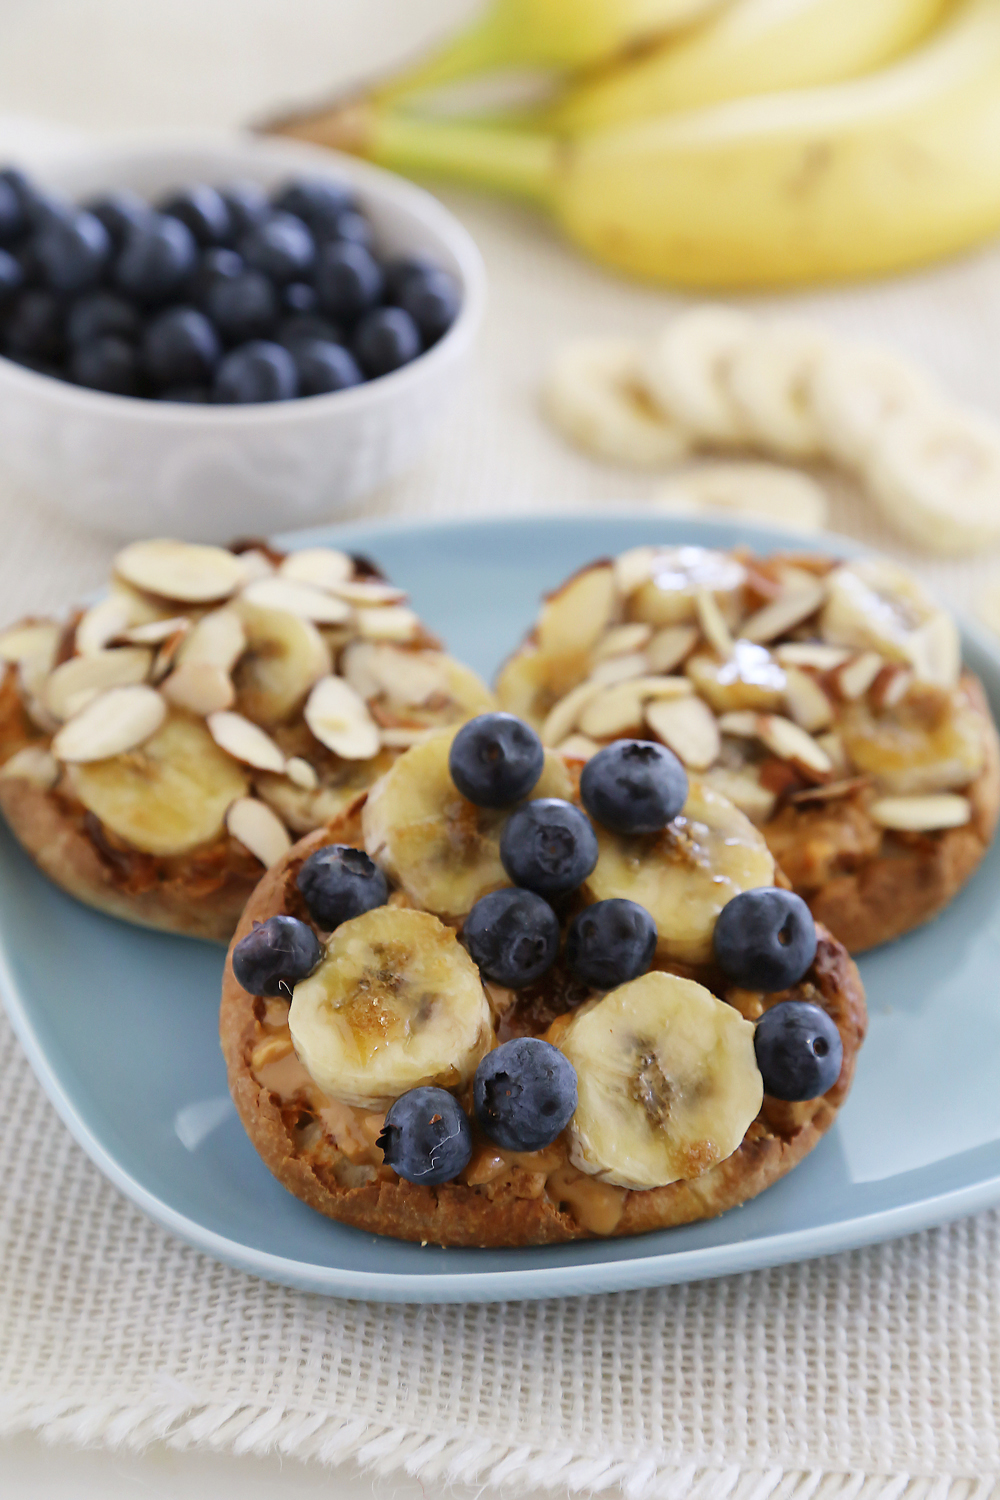 Brûléed Banana and Peanut Butter English Muffins – These delicious, protein packed muffins are perfect for weekend mornings! thecomfortofcooking.com